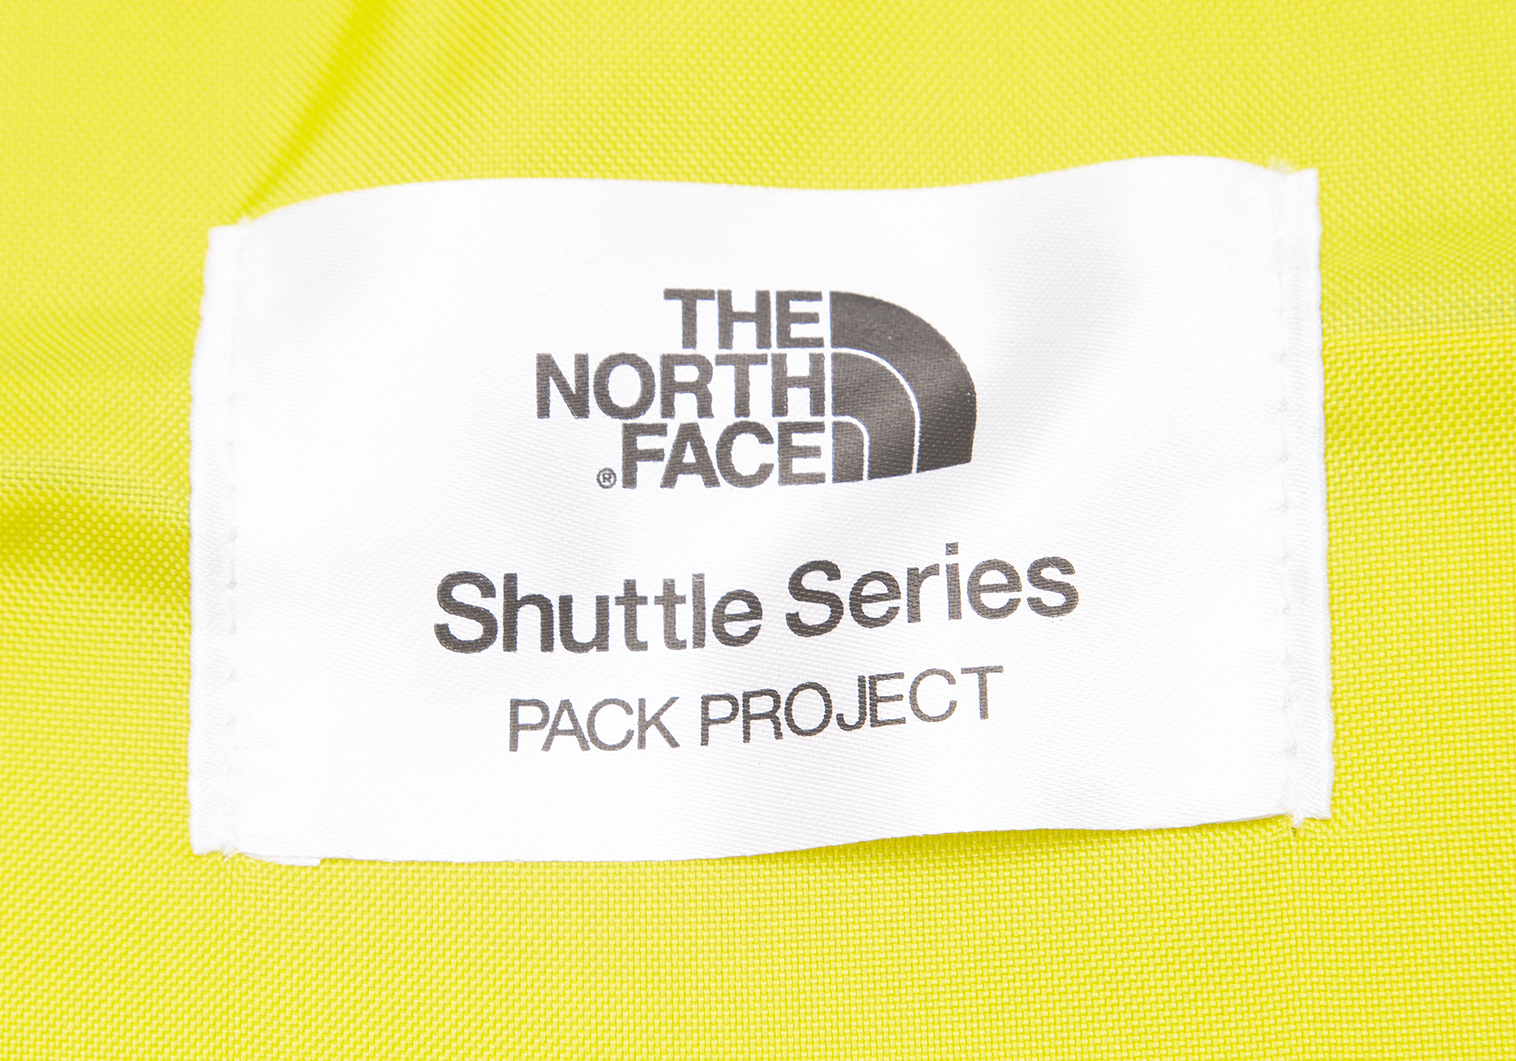 THE NORTH FACE  shuttle series pack proj